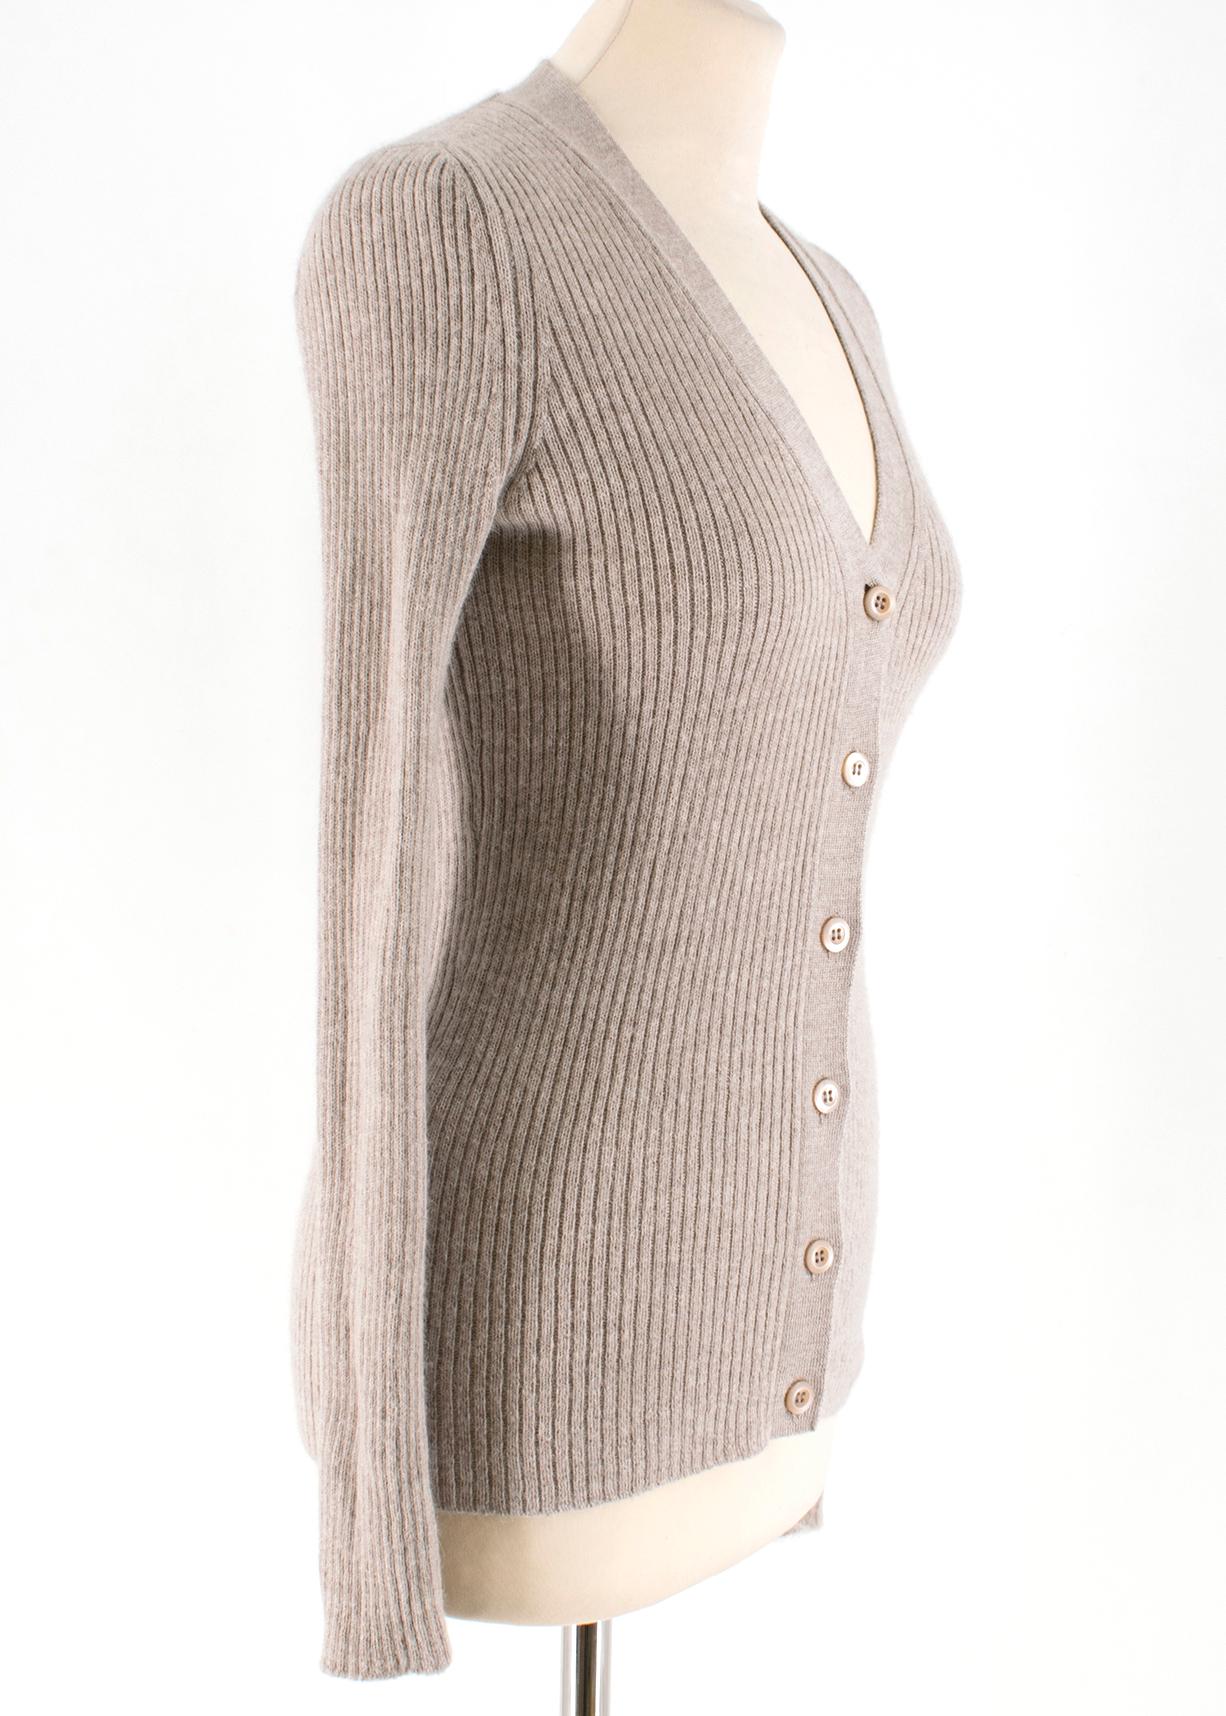 Prada Brown Alpaca Lined V-neck Cardigan

- Brown, alpaca
- Line seamed
- Single breasted buttoned closure
- V-neck
- Long sleeves

Please note, these items are pre-owned and may show some signs of storage, even when unworn and unused. This is